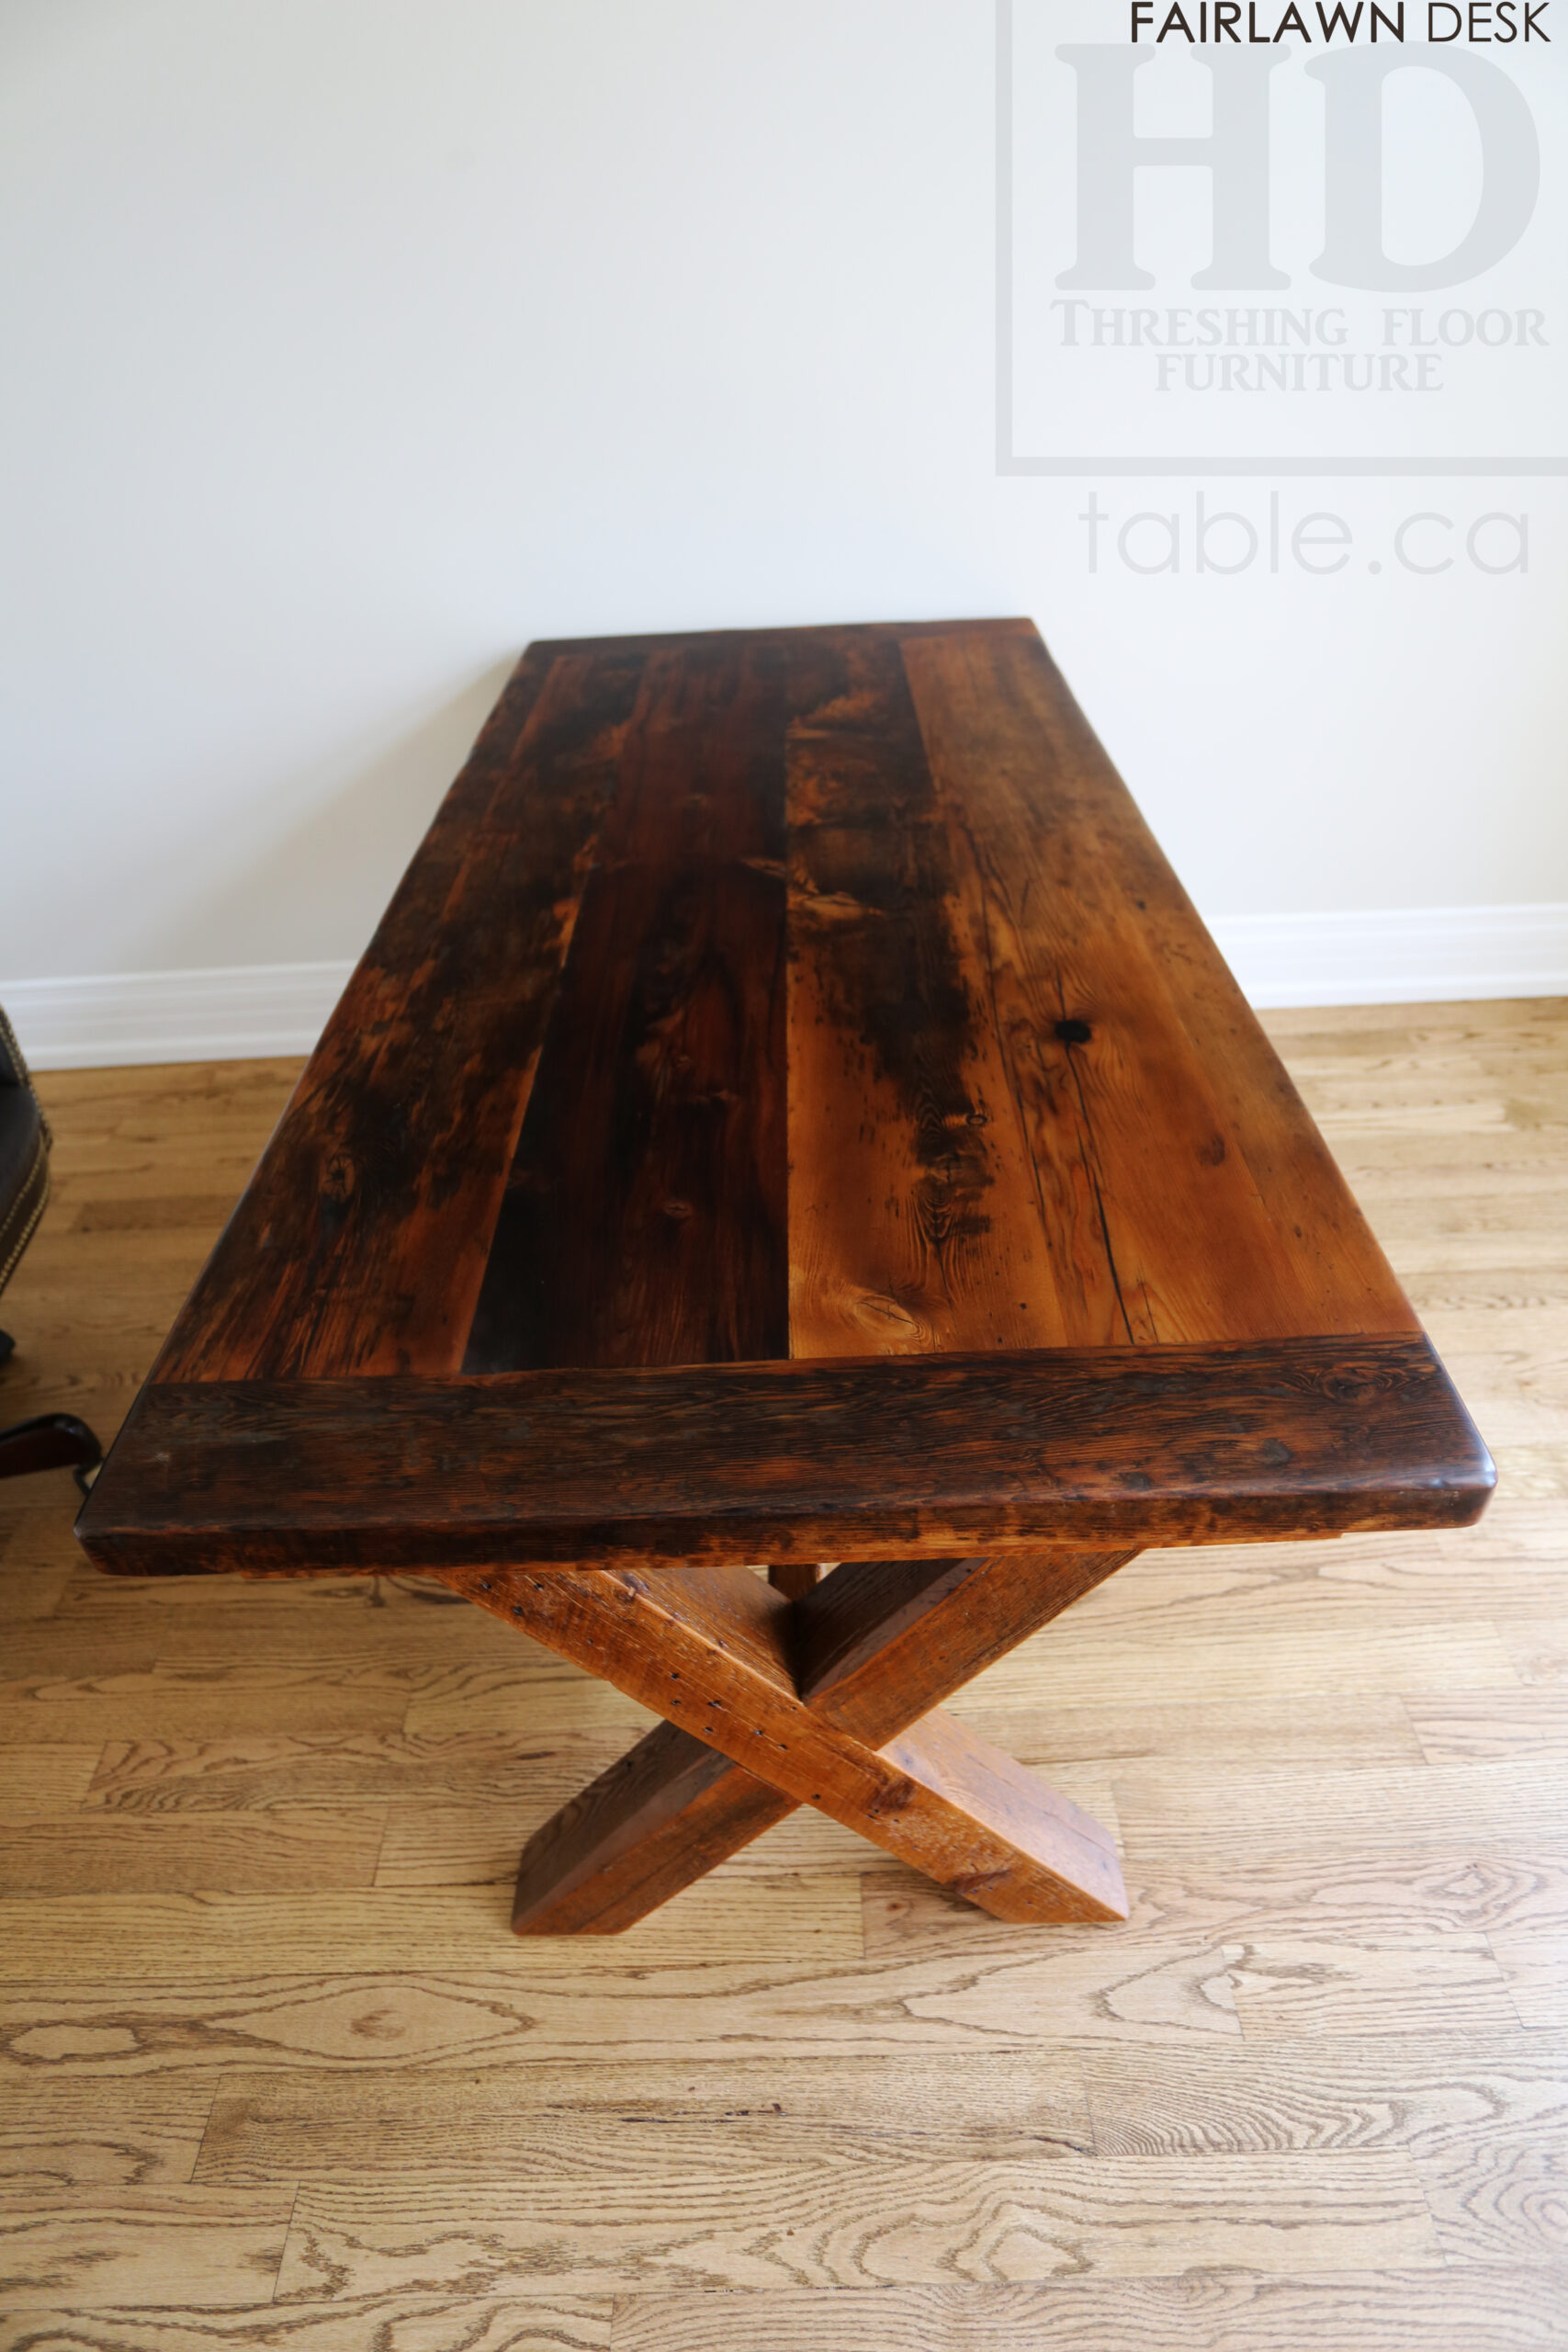 5’ 8” Reclaimed Ontario Barnwood Desk we made for a Toronto, Ontario home – 32” wide –4”x4” Windbrace Beam X Base – 3” skirting – 2 Drawers / Lee Valley Hardware Cast Brass Handles - Old Growth Hemlock Threshing Floor & Grainery Board Construction - Original edges & distressing maintained – Bread Edge Board Ends – Premium epoxy + matte polyurethane finish – Mission Cast Brass Lee Valley Hardware - www.table.ca